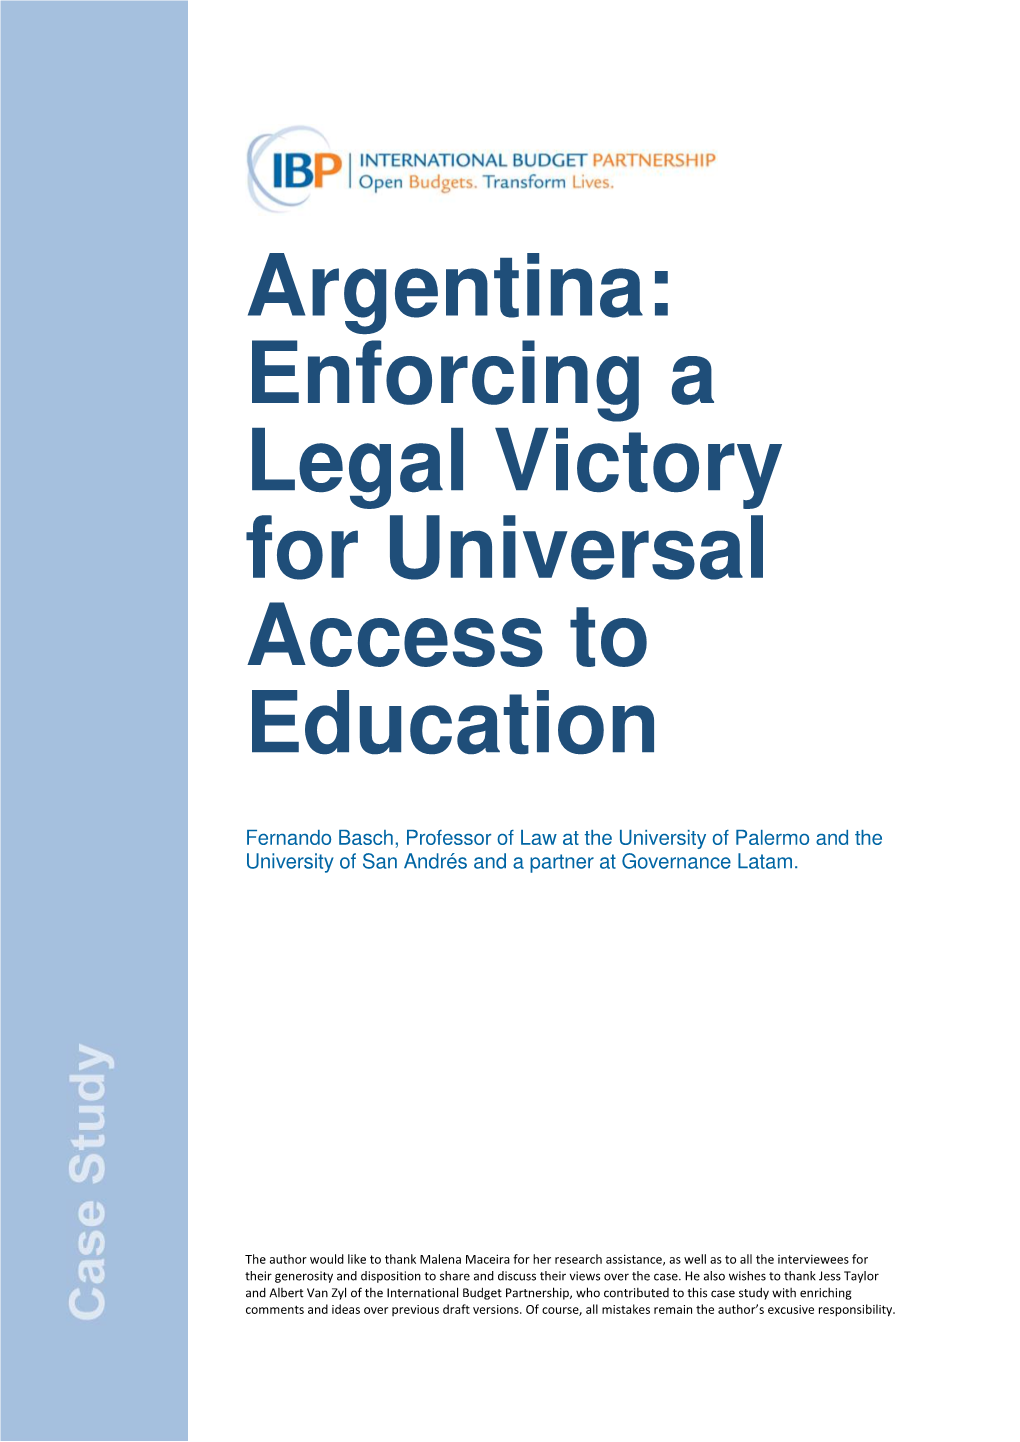 Argentina: Enforcing a Legal Victory for Universal Access to Education